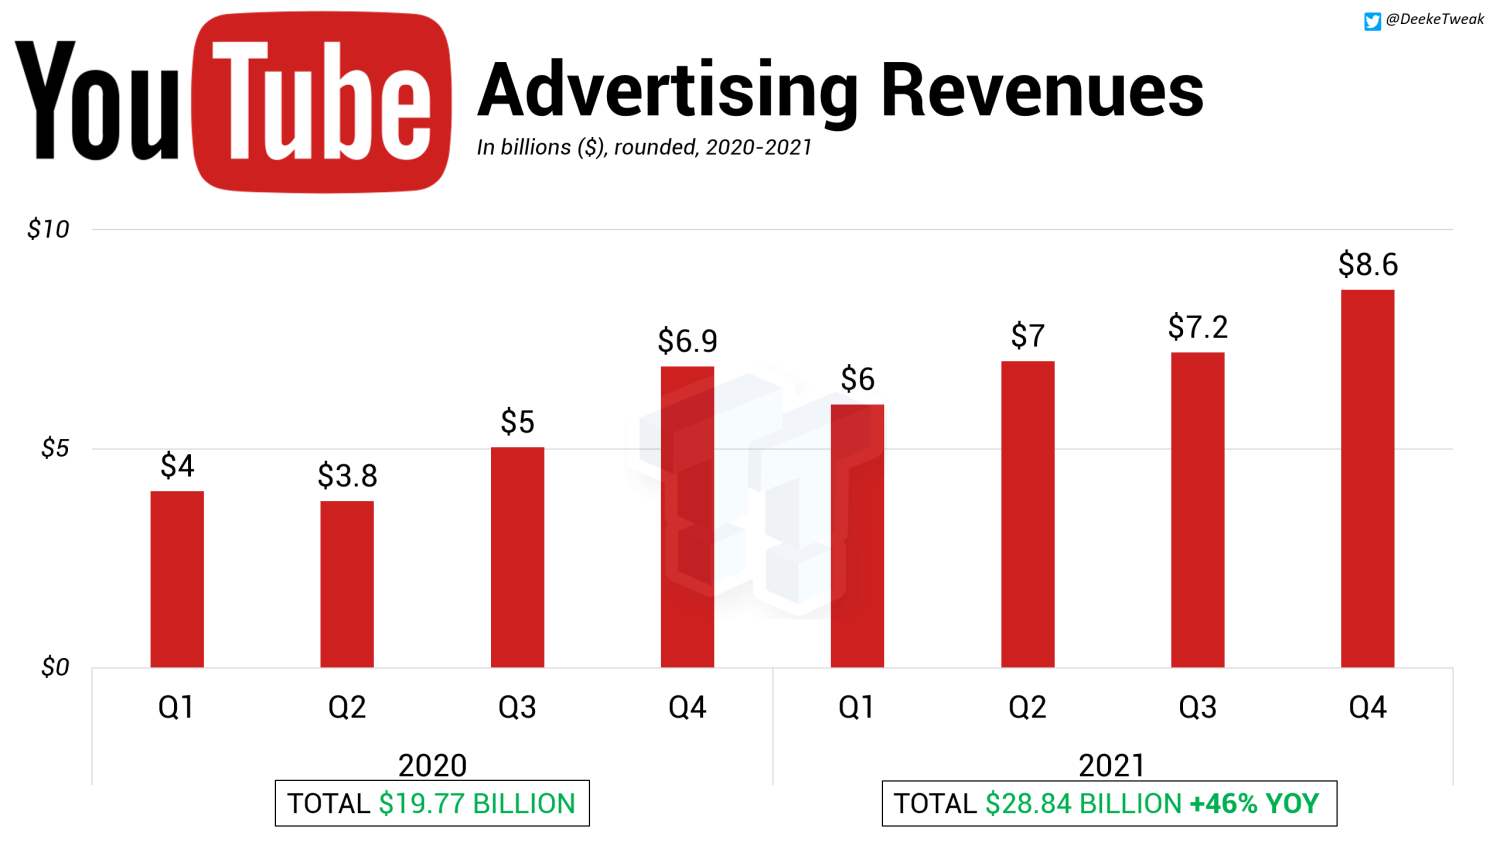 YouTube made 28 billion from ads in 2021, more than PlayStation